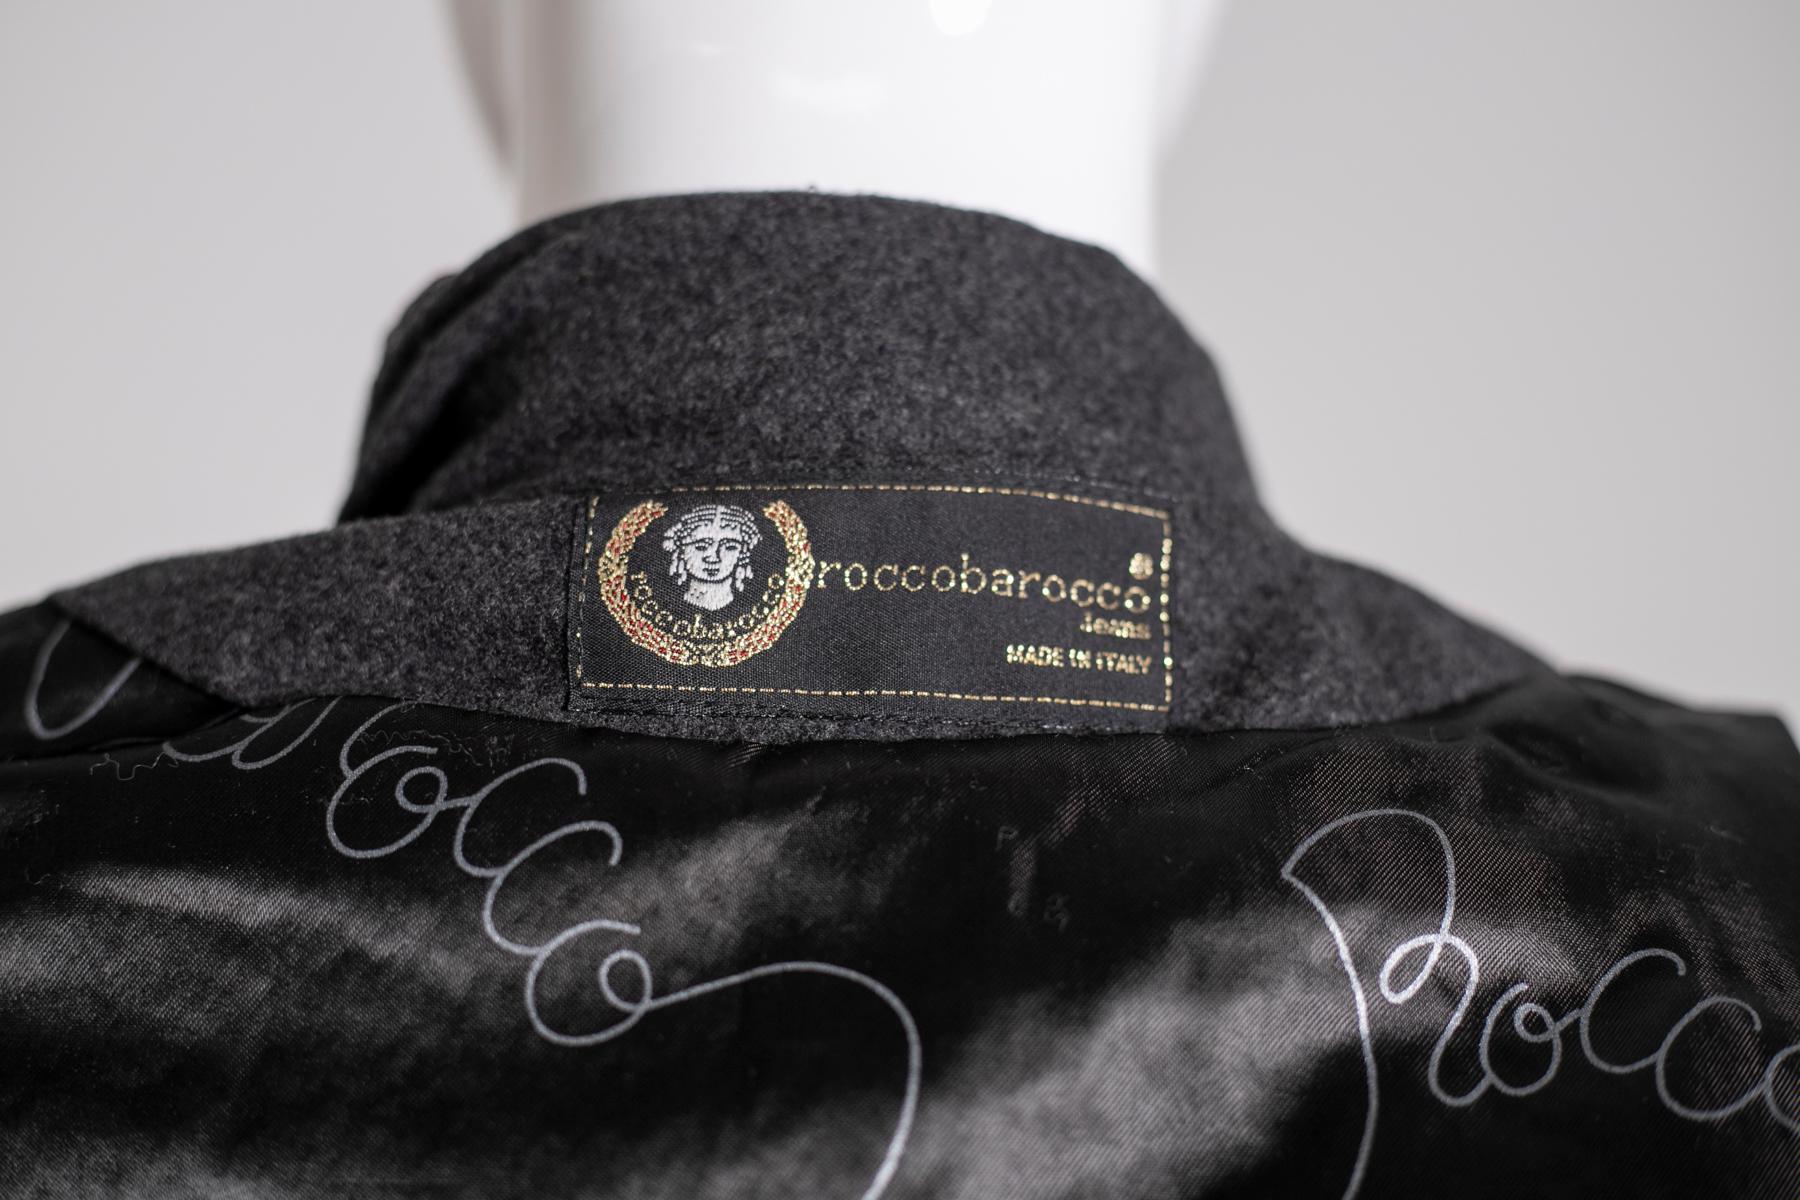 Rare jeans and velvet jacket designed by stylist Rocco Barocco in the 1990s, fine Italian manufacture. ORIGINAL LABEL AND PROMINENT LOGO.
The jacket has a short cut, at navel height. The sleeves are long and very soft, with narrower cuffs.
The